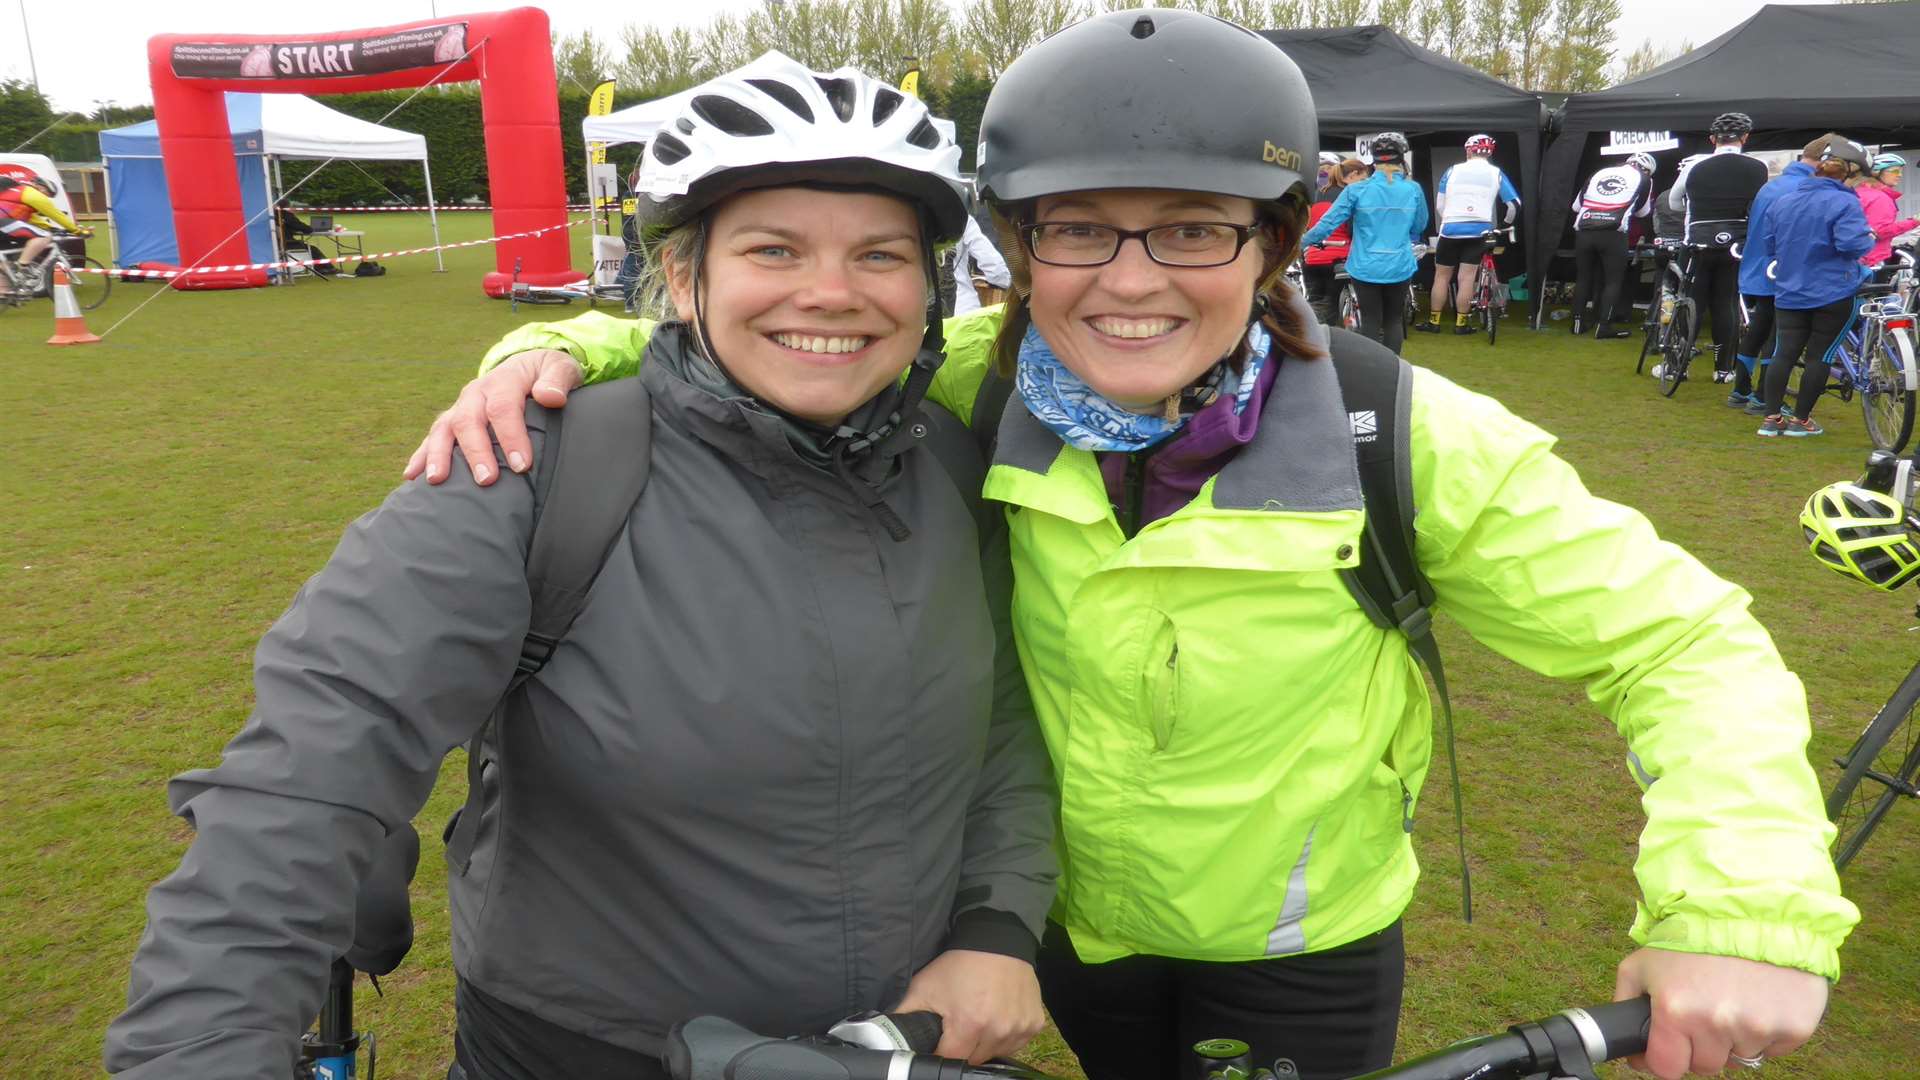 Fiona Pender of Rainham and Catherine Price of Rochester completed the 50km route of the KM Big Bike Ride 2015 in aid of the charity Medway Asthma Self Help (MASH).